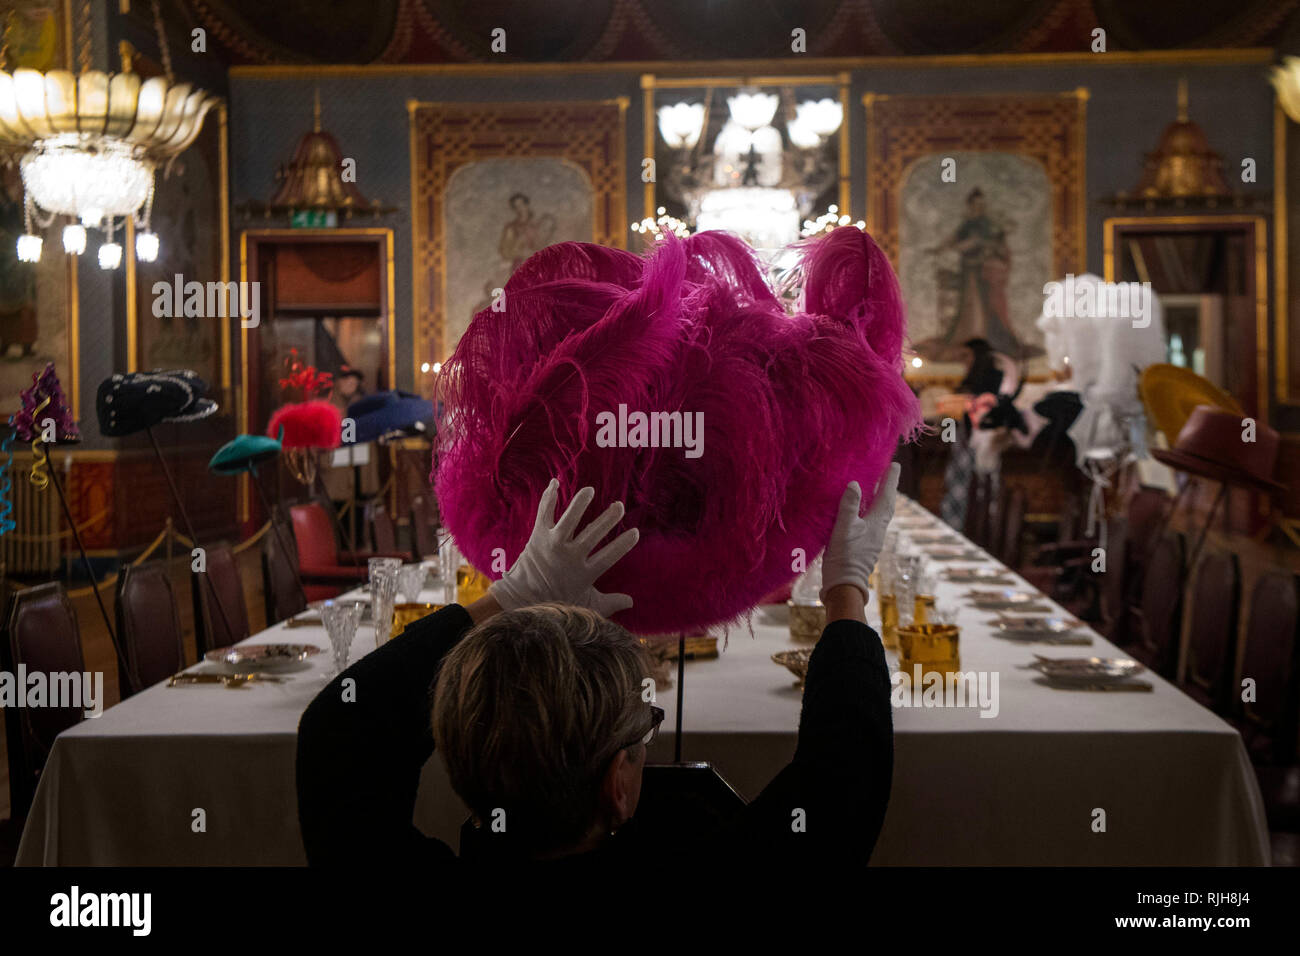 A member of staff adjusts a hat designed for Lady Gaga (2012) by milliner Stephen Jones at the launch of Chinoiserie-on-Sea exhibition which will fill the rooms of the Royal Pavilion, Brighton, East Sussex, with dozens of hats made by Jones throughout his 40-year career. Stock Photo